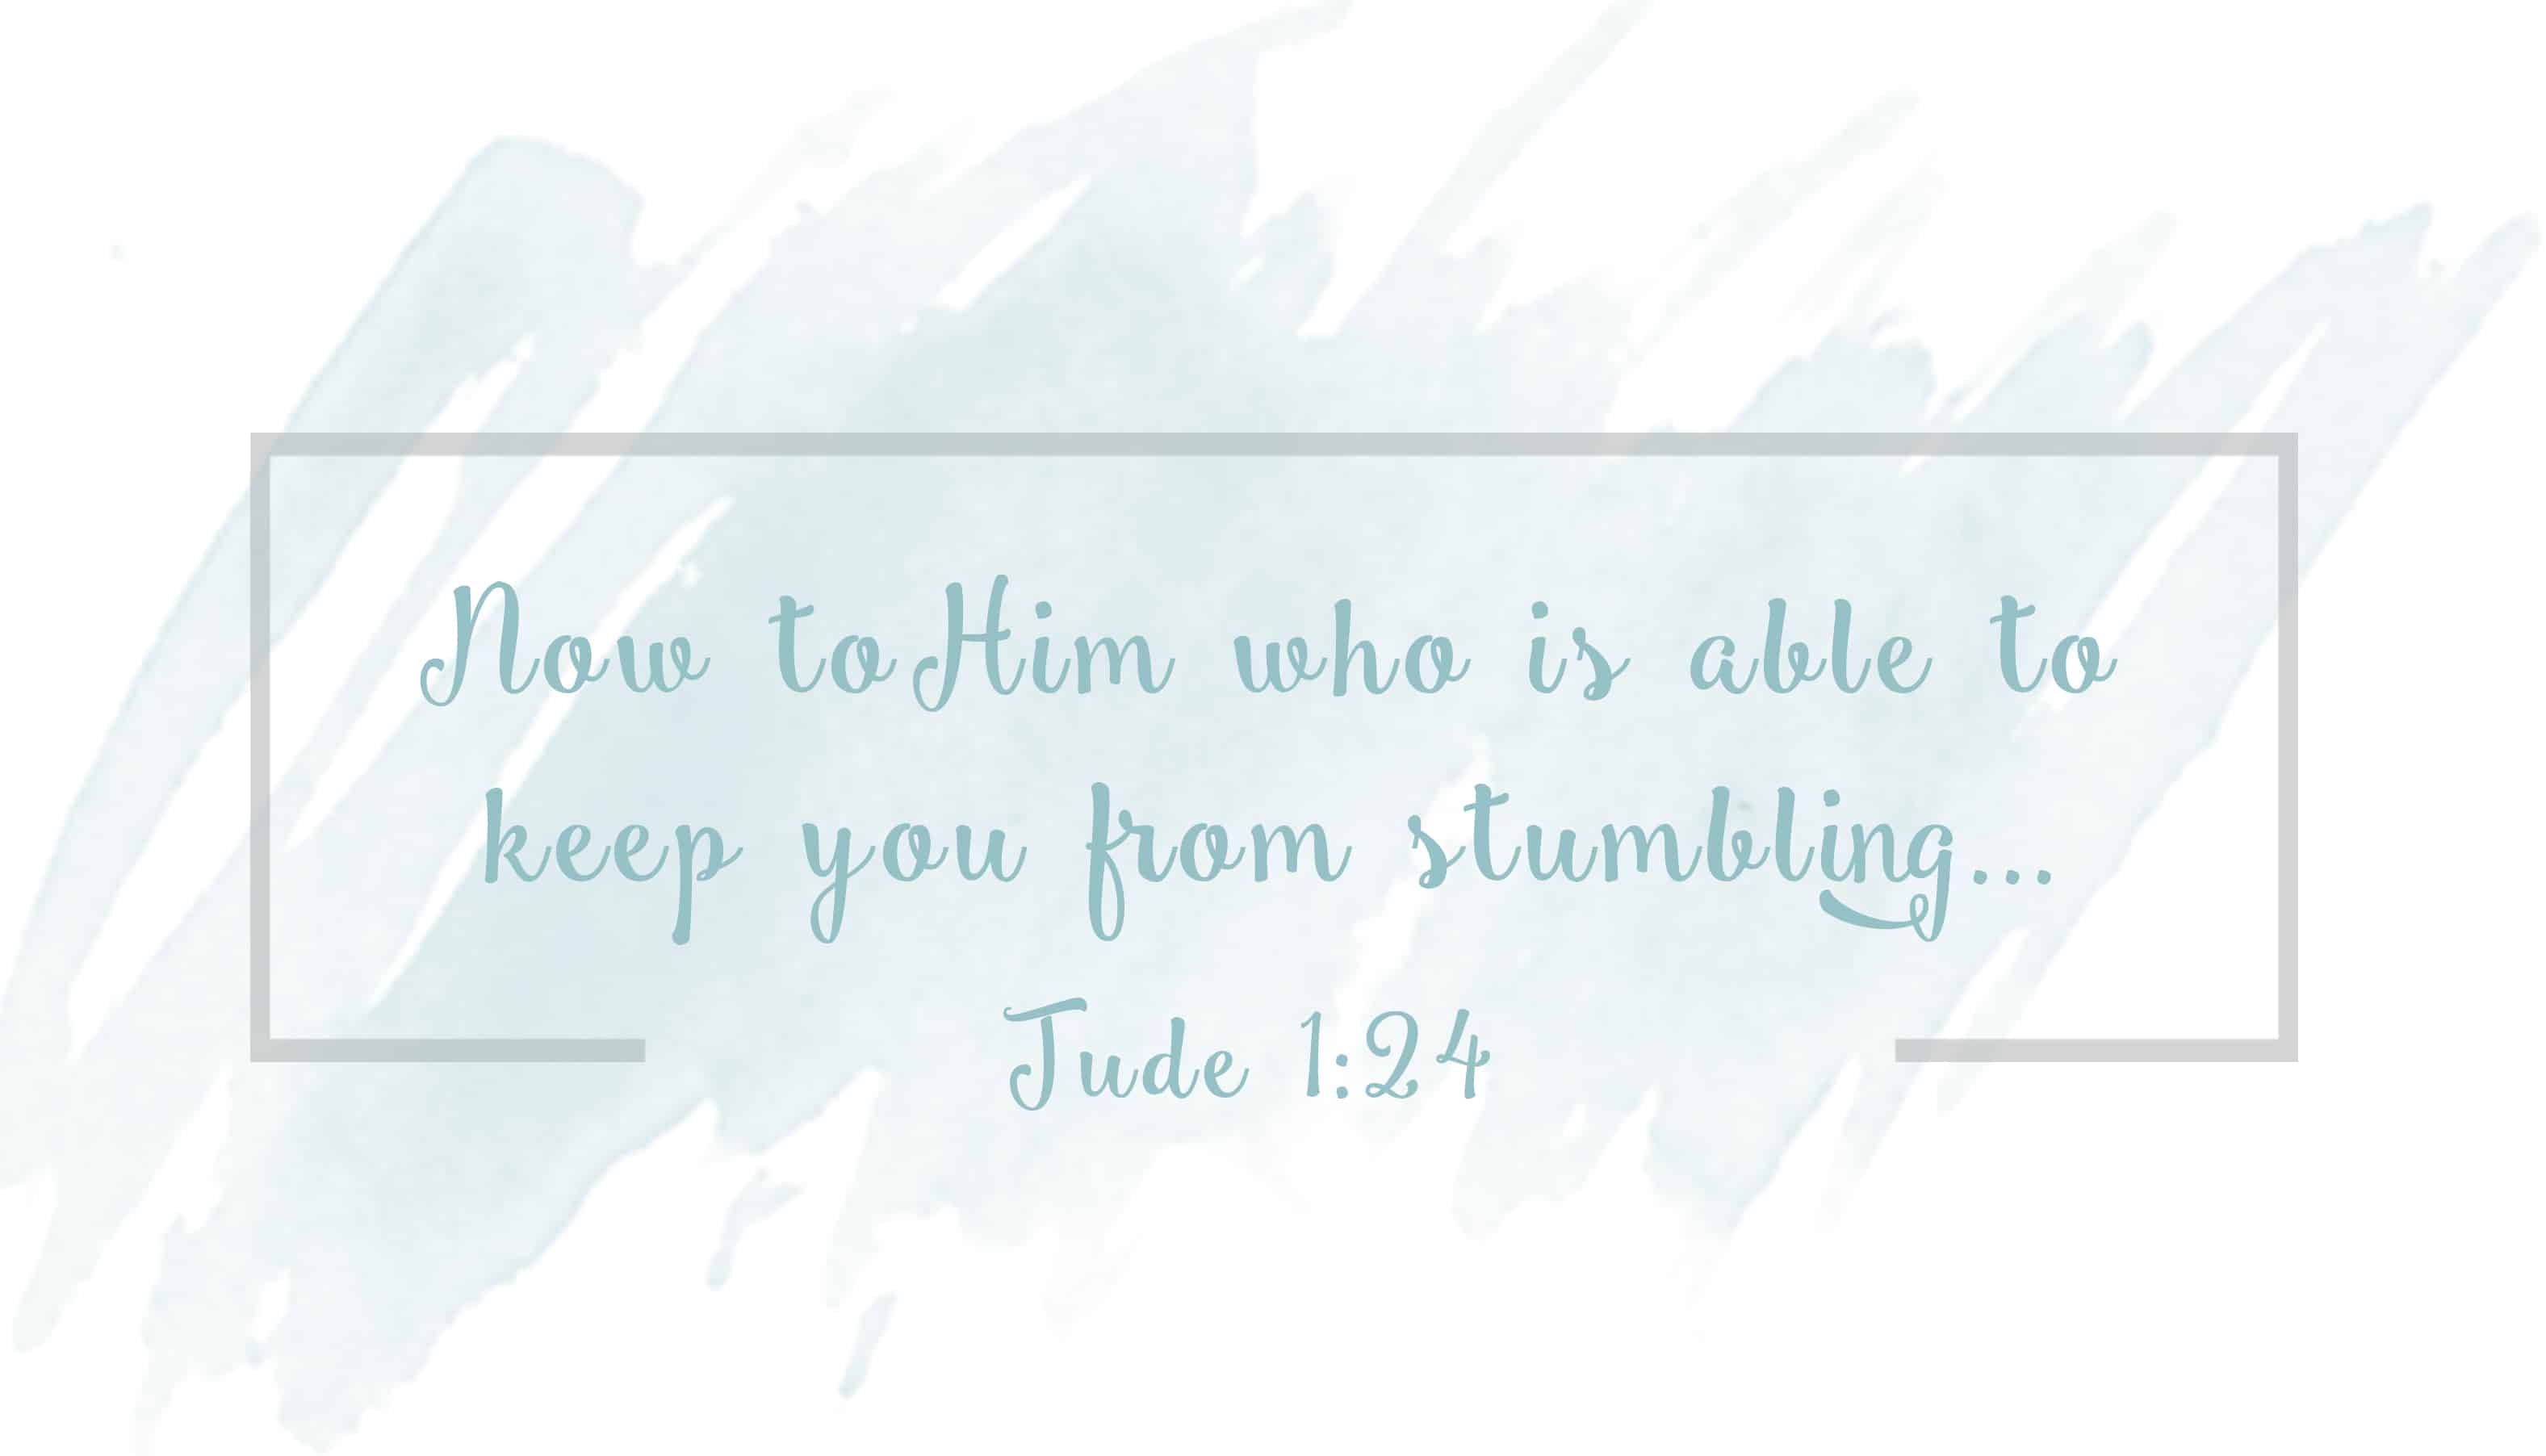 bible-printable-Jude-1:24-to-him-who-is-able-to-keep-you-from-stumbling, God is the only One who can keep you from falling prey to Satan